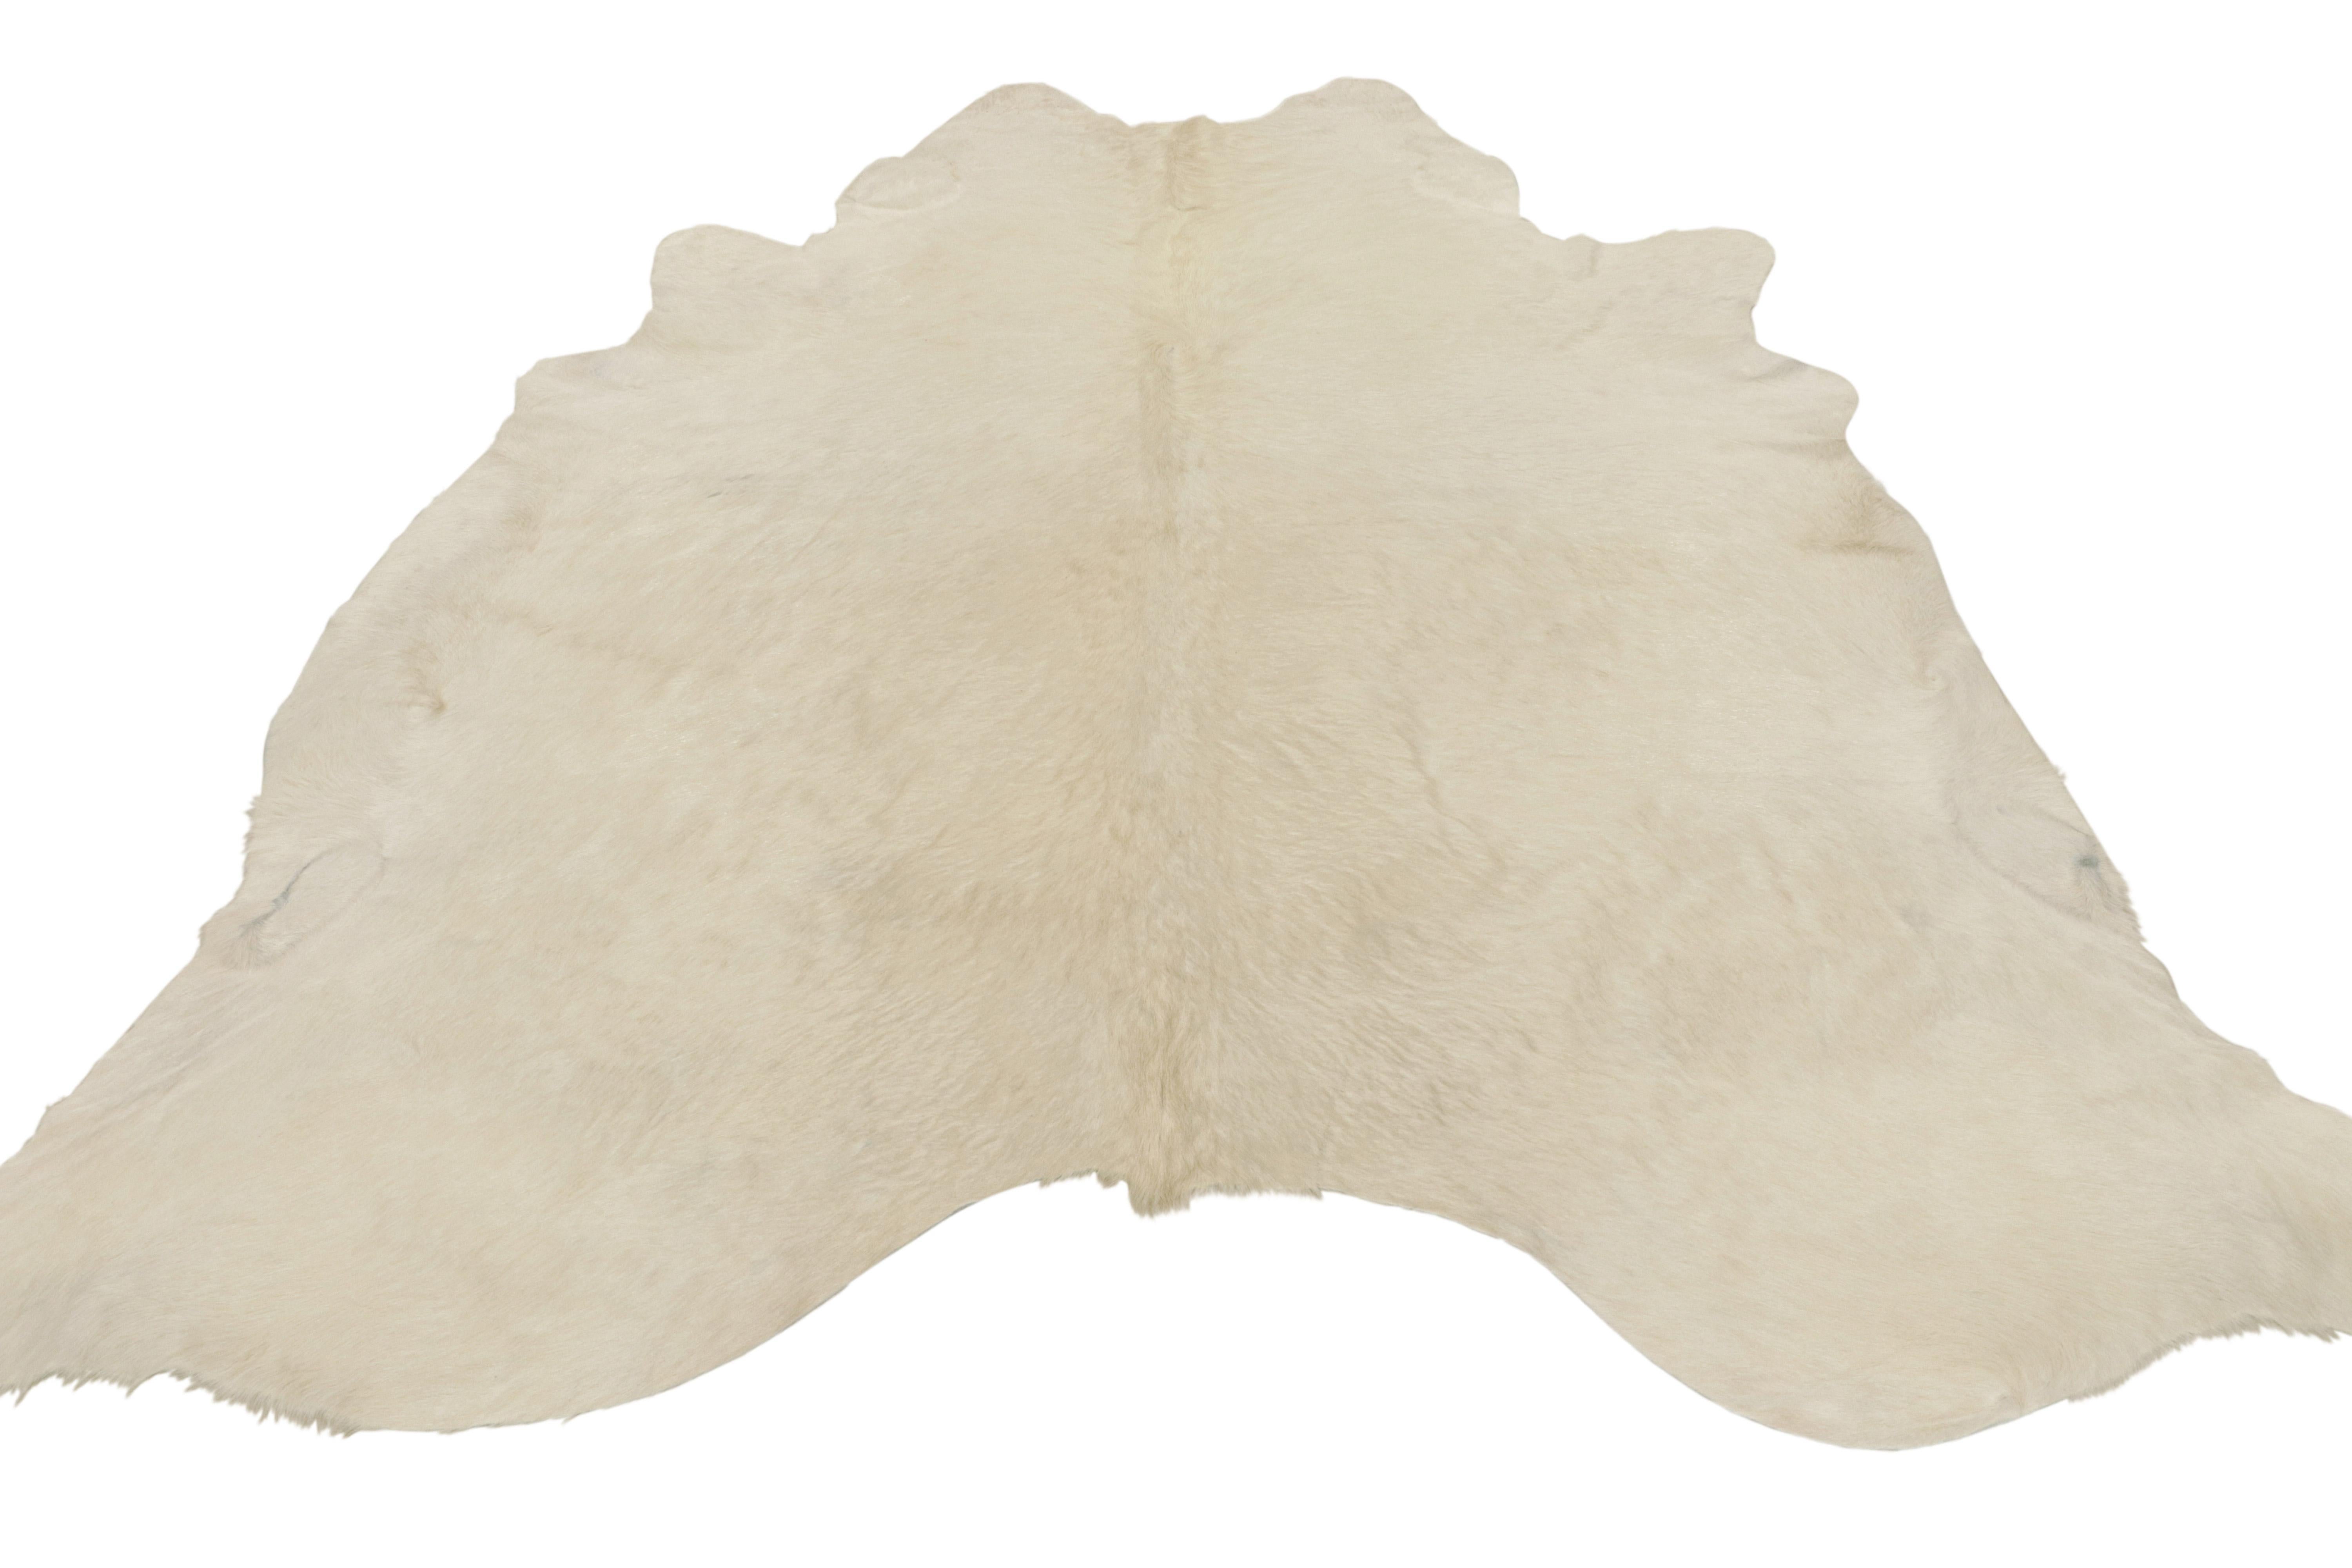 Brazilian Rug & Kilim’s Modern Cowhide Rug in Off-White and Beige Tones For Sale